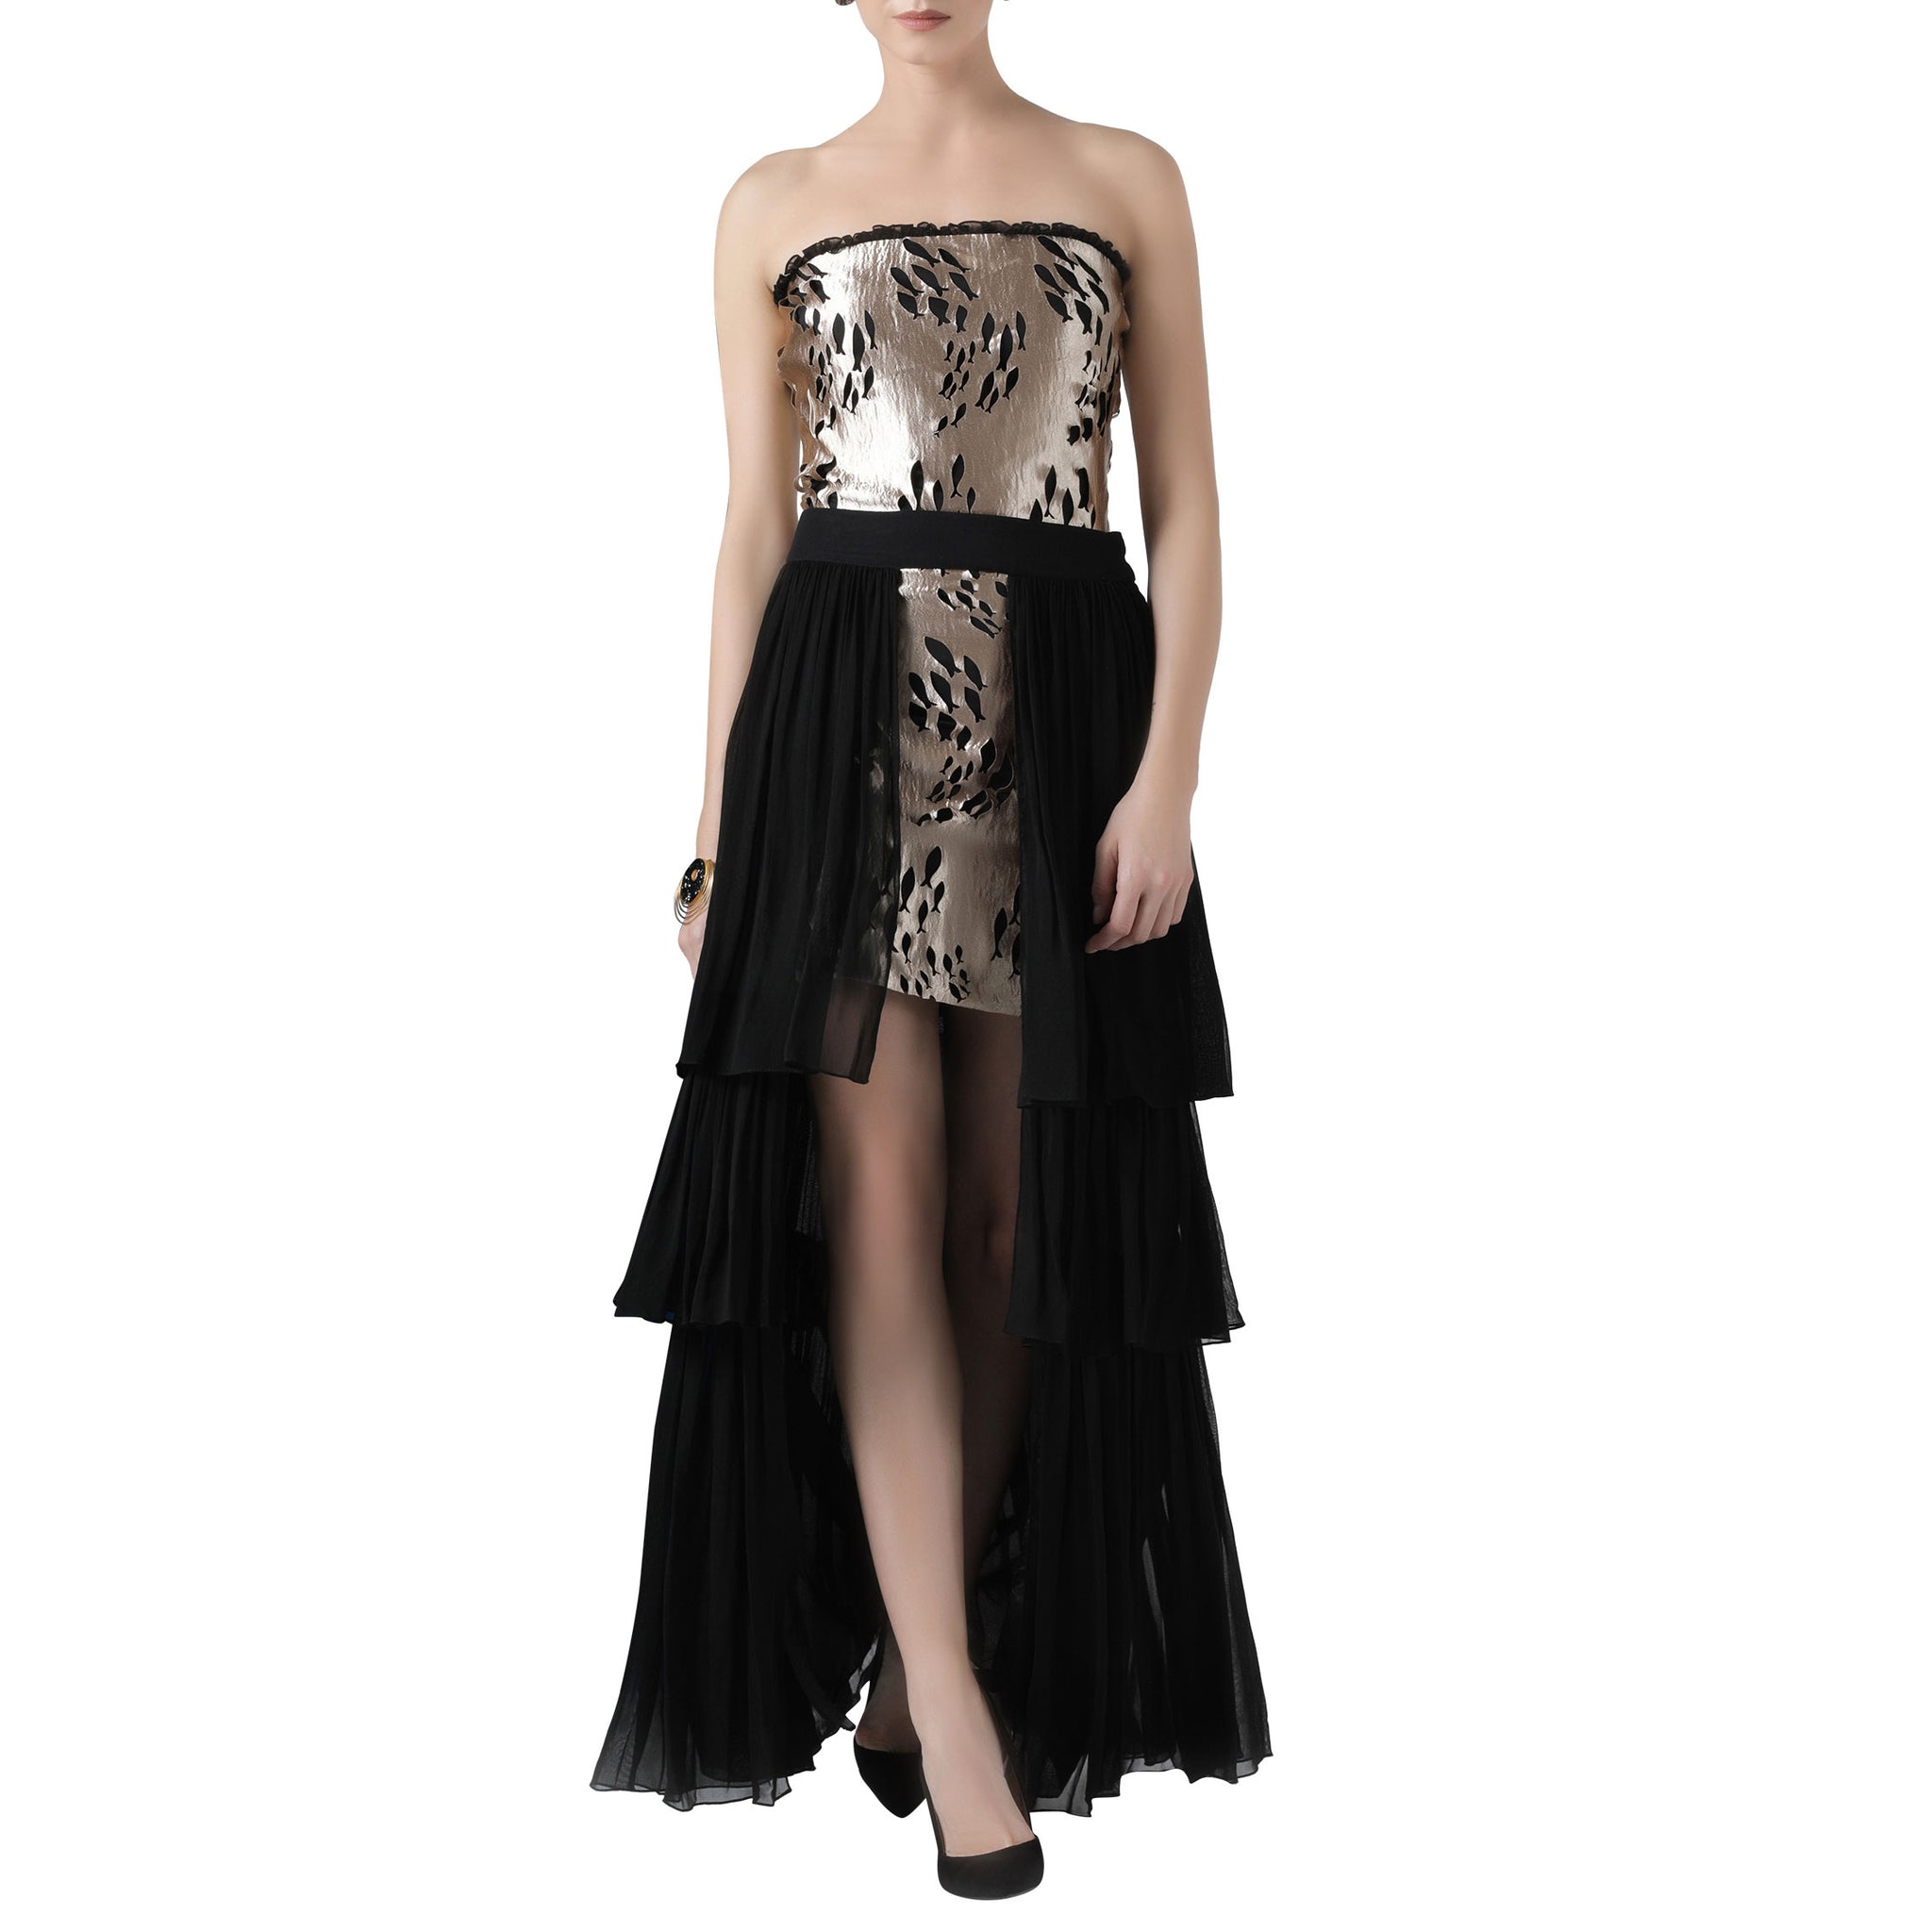 Cutwork Dress with a Tiered Skirt